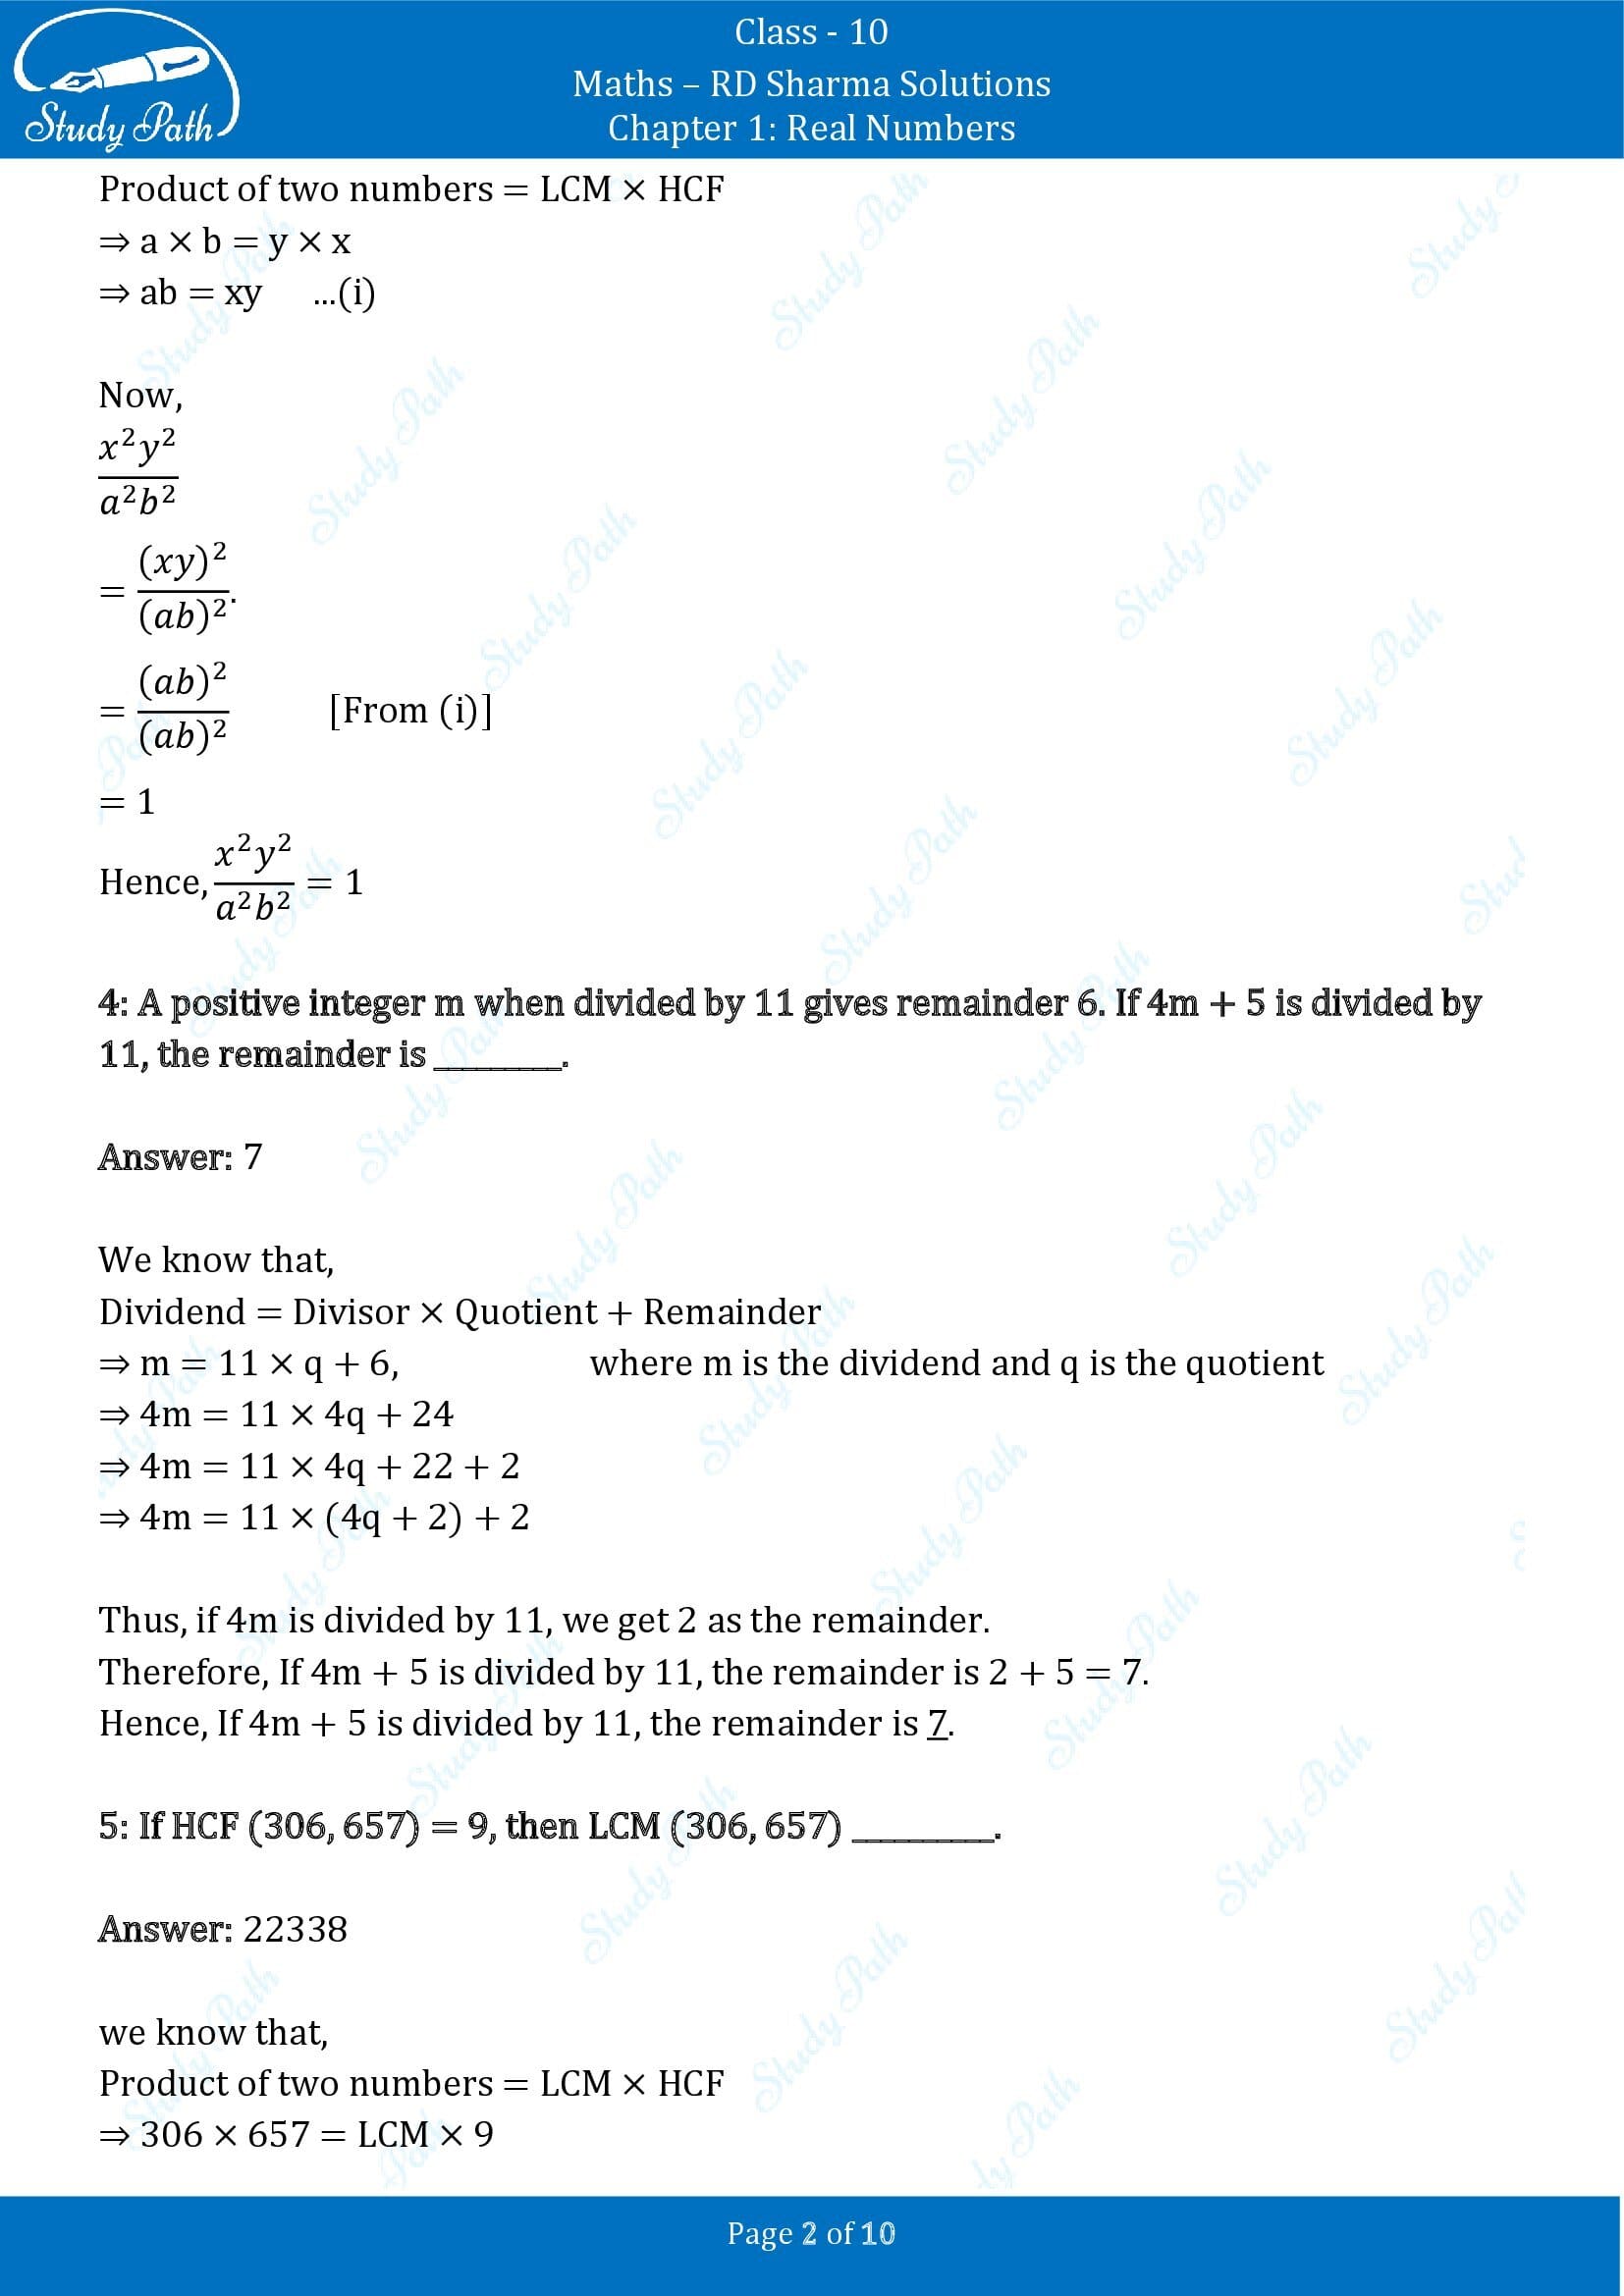 RD Sharma Solutions Class 10 Chapter 1 Real Numbers Fill in the Blank Type Questions FBQs 00002